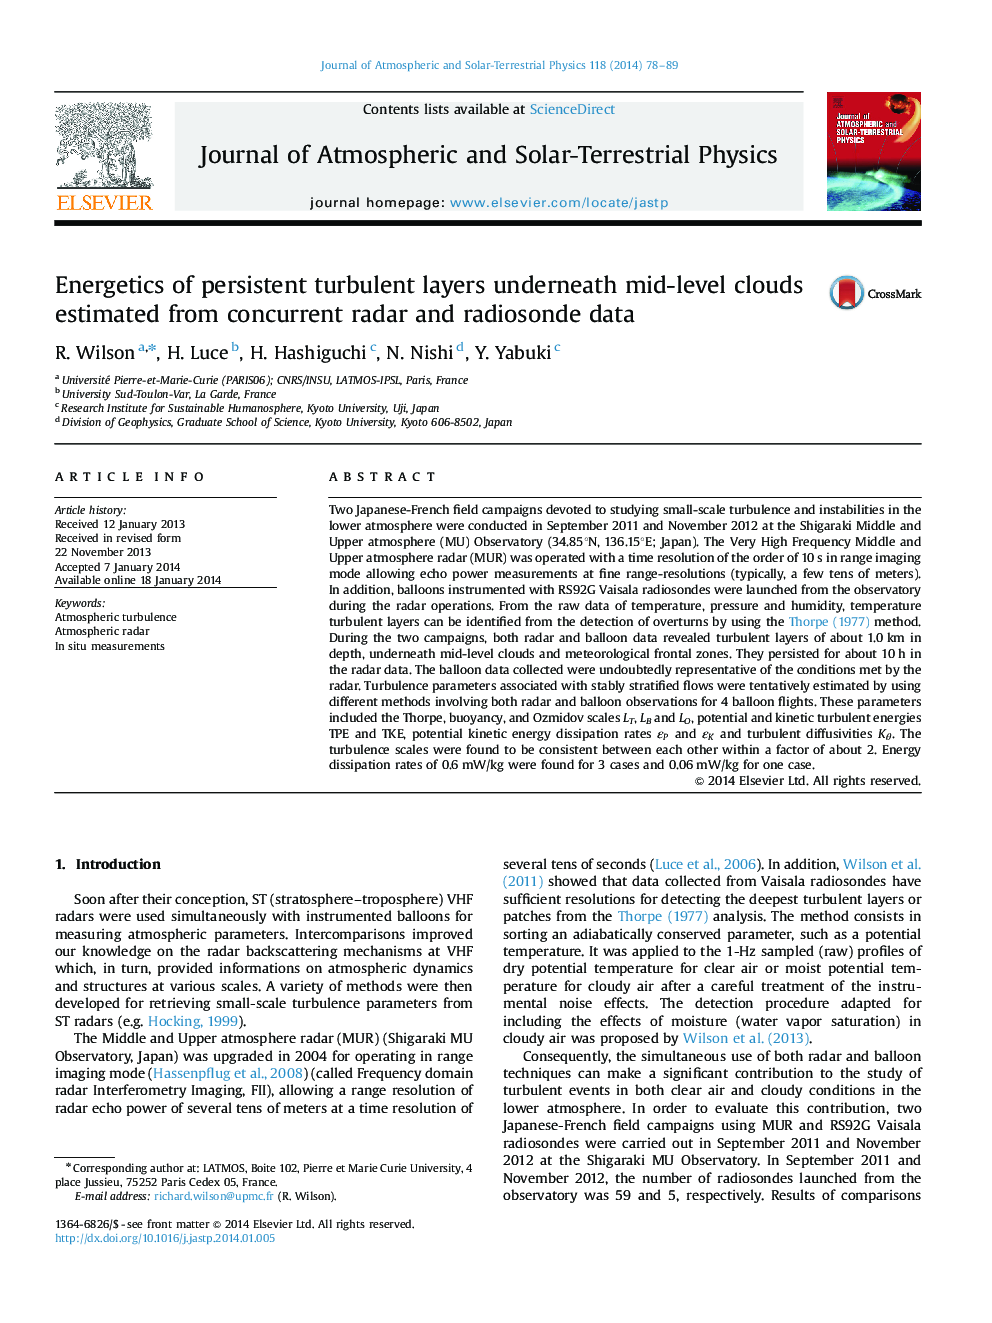 Energetics of persistent turbulent layers underneath mid-level clouds estimated from concurrent radar and radiosonde data